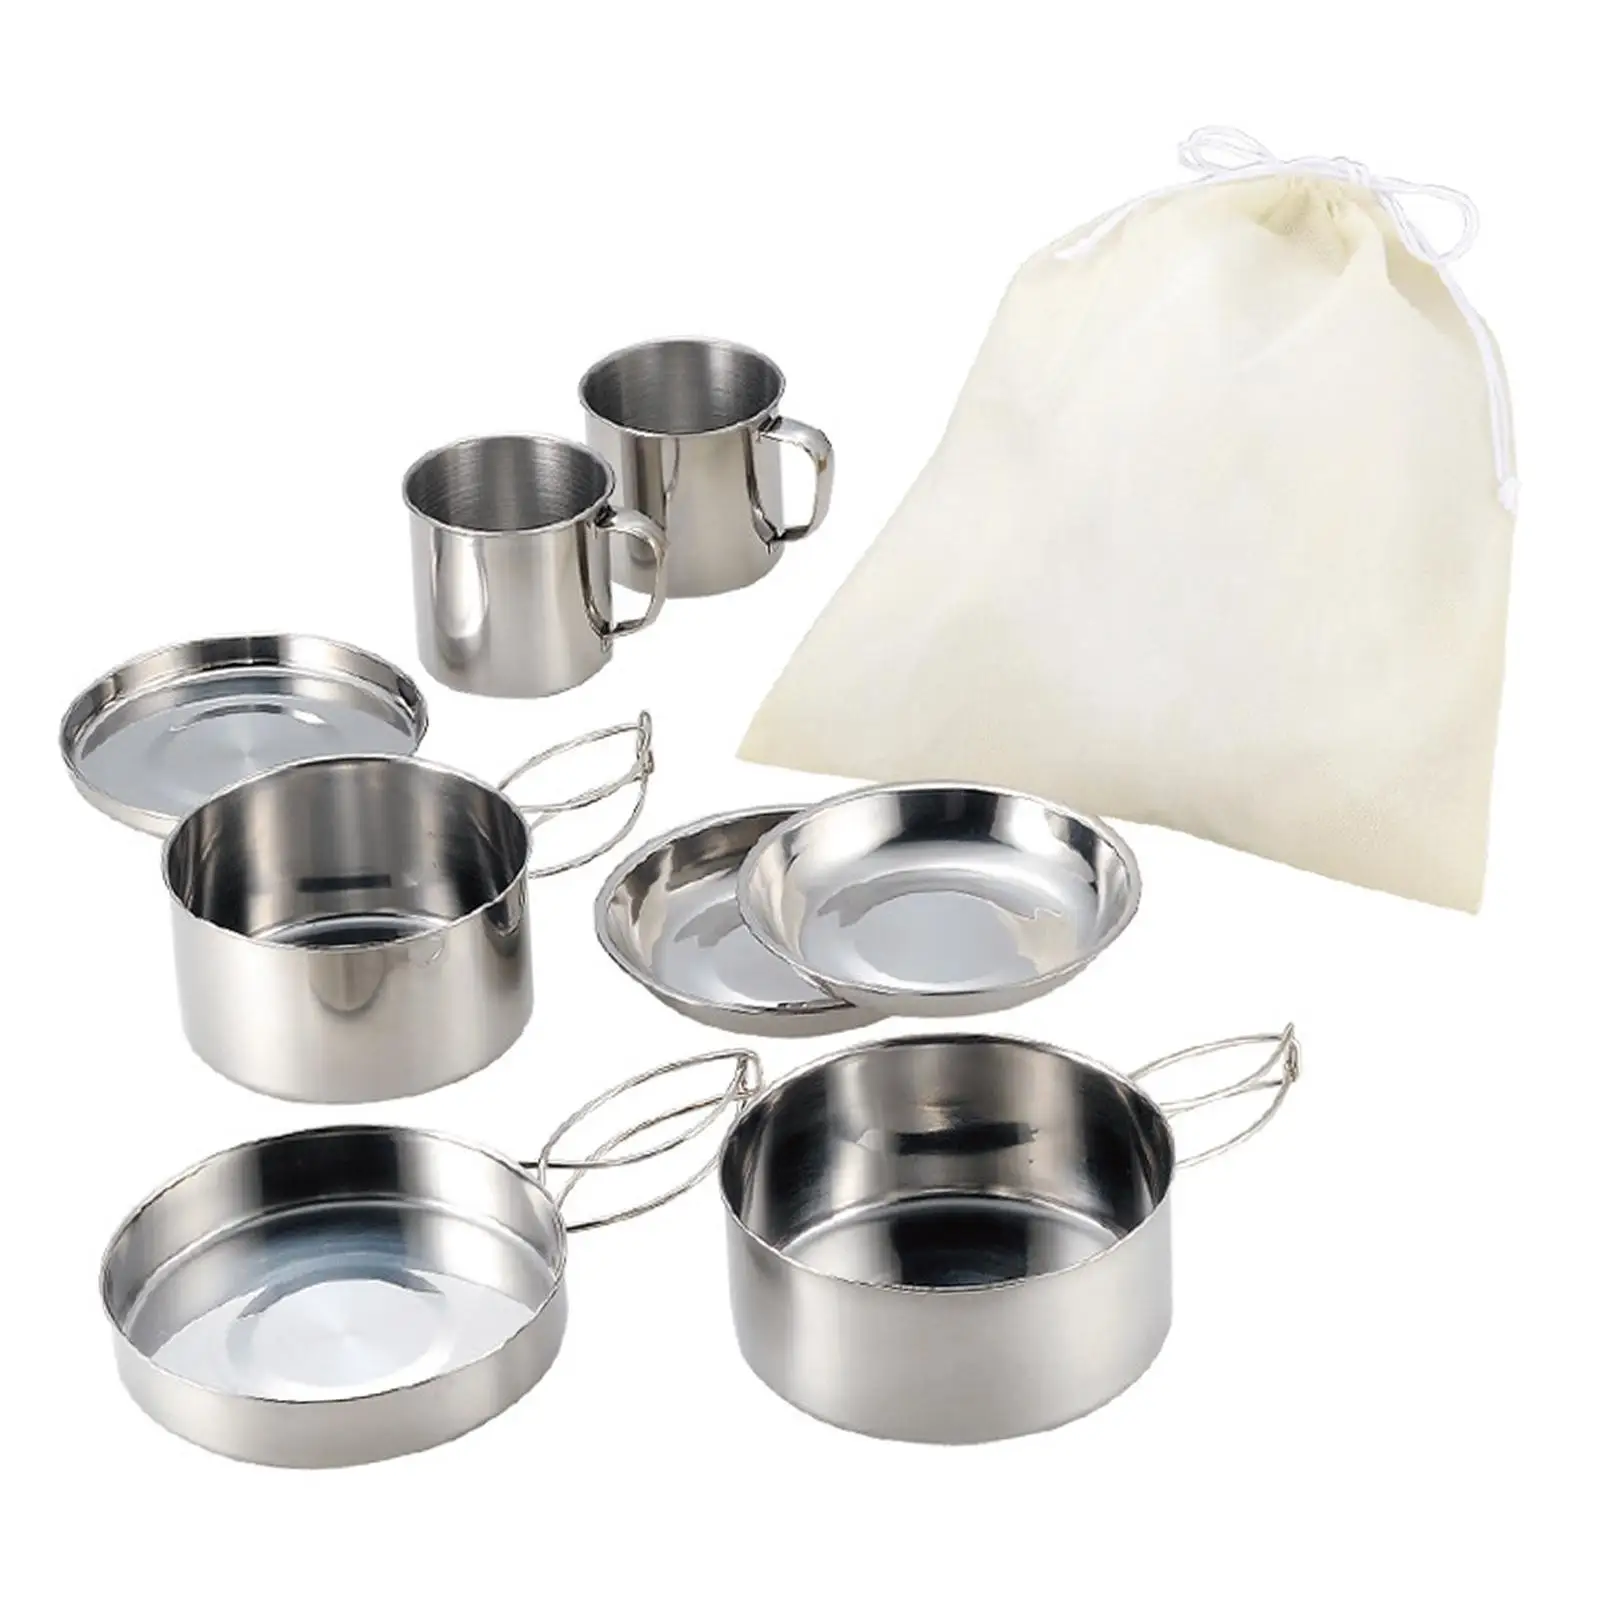 8Pcs Camping Cookware Mess Kit Tableware Fishing Outdoor Pot Plates and Cups